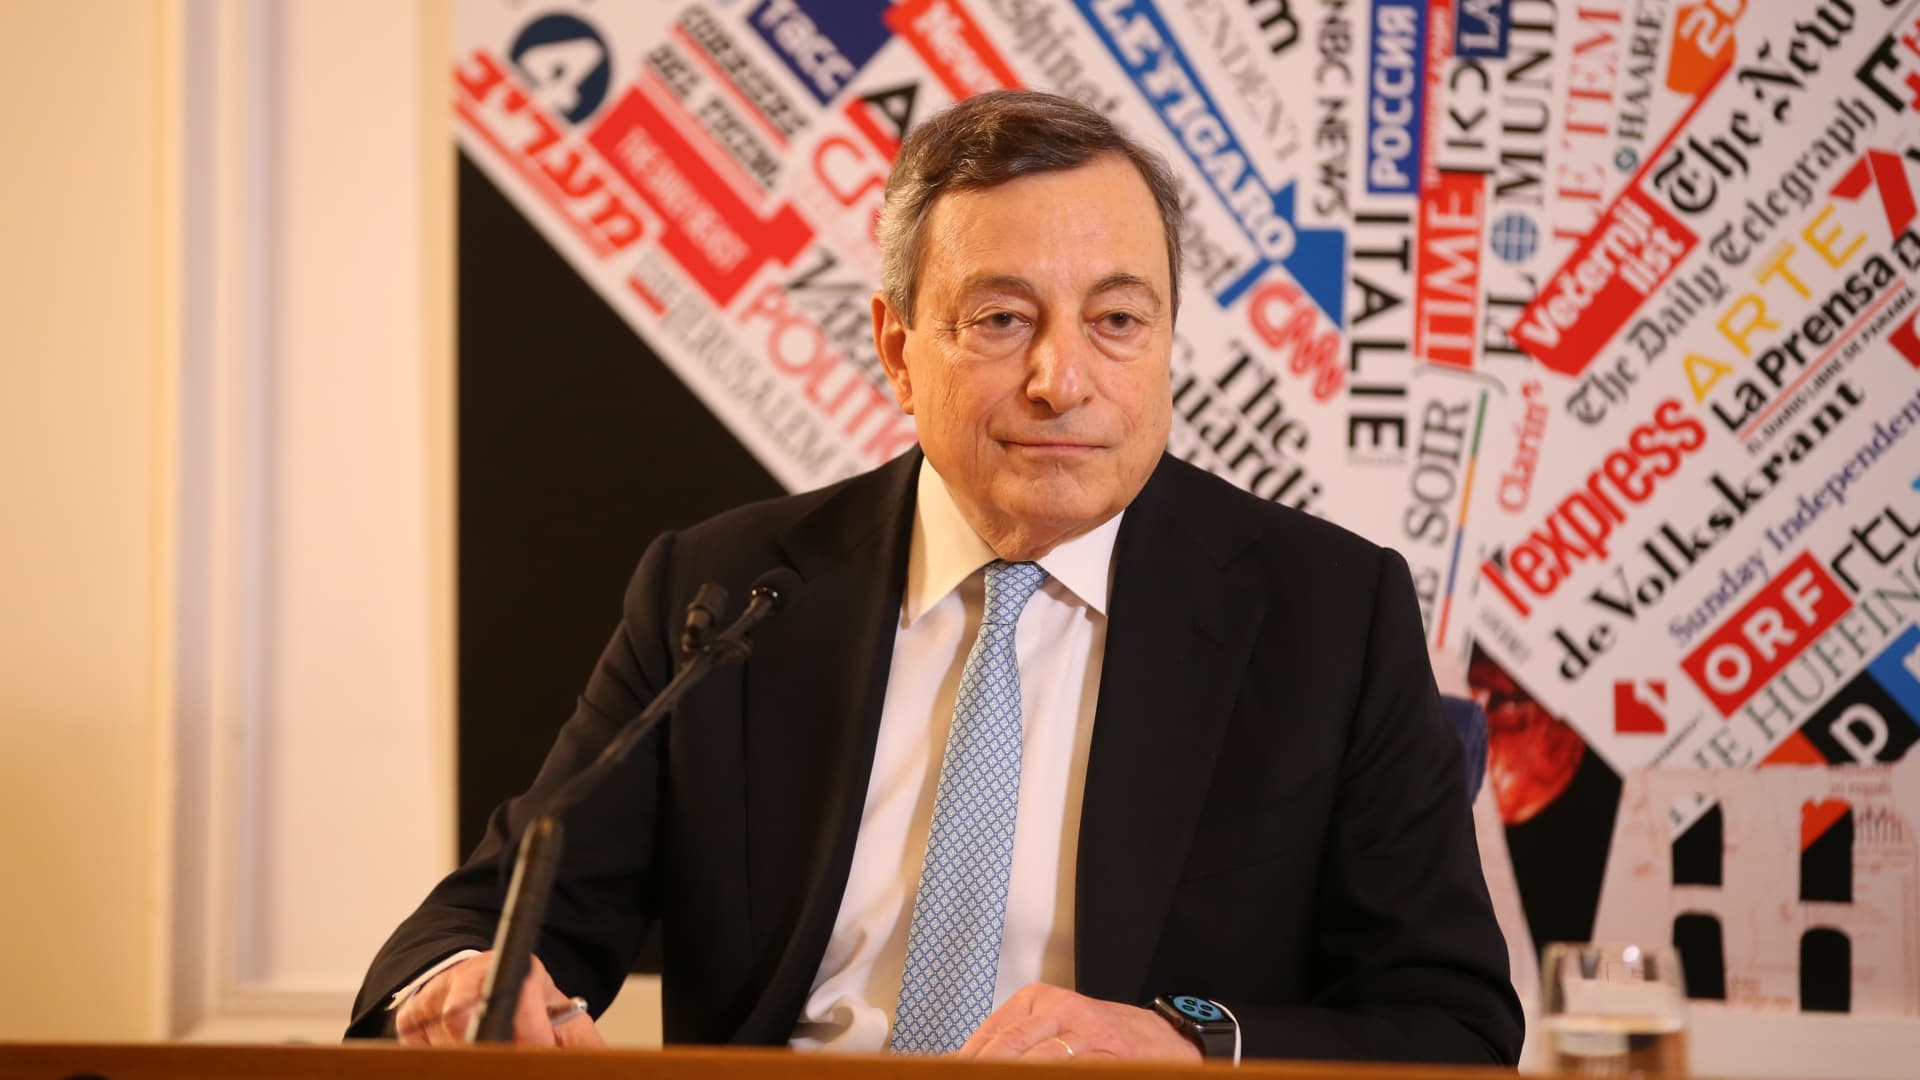 Italian Prime Minister Mario Draghi spoke to reporters on Thursday about his call with Russia's Putin.